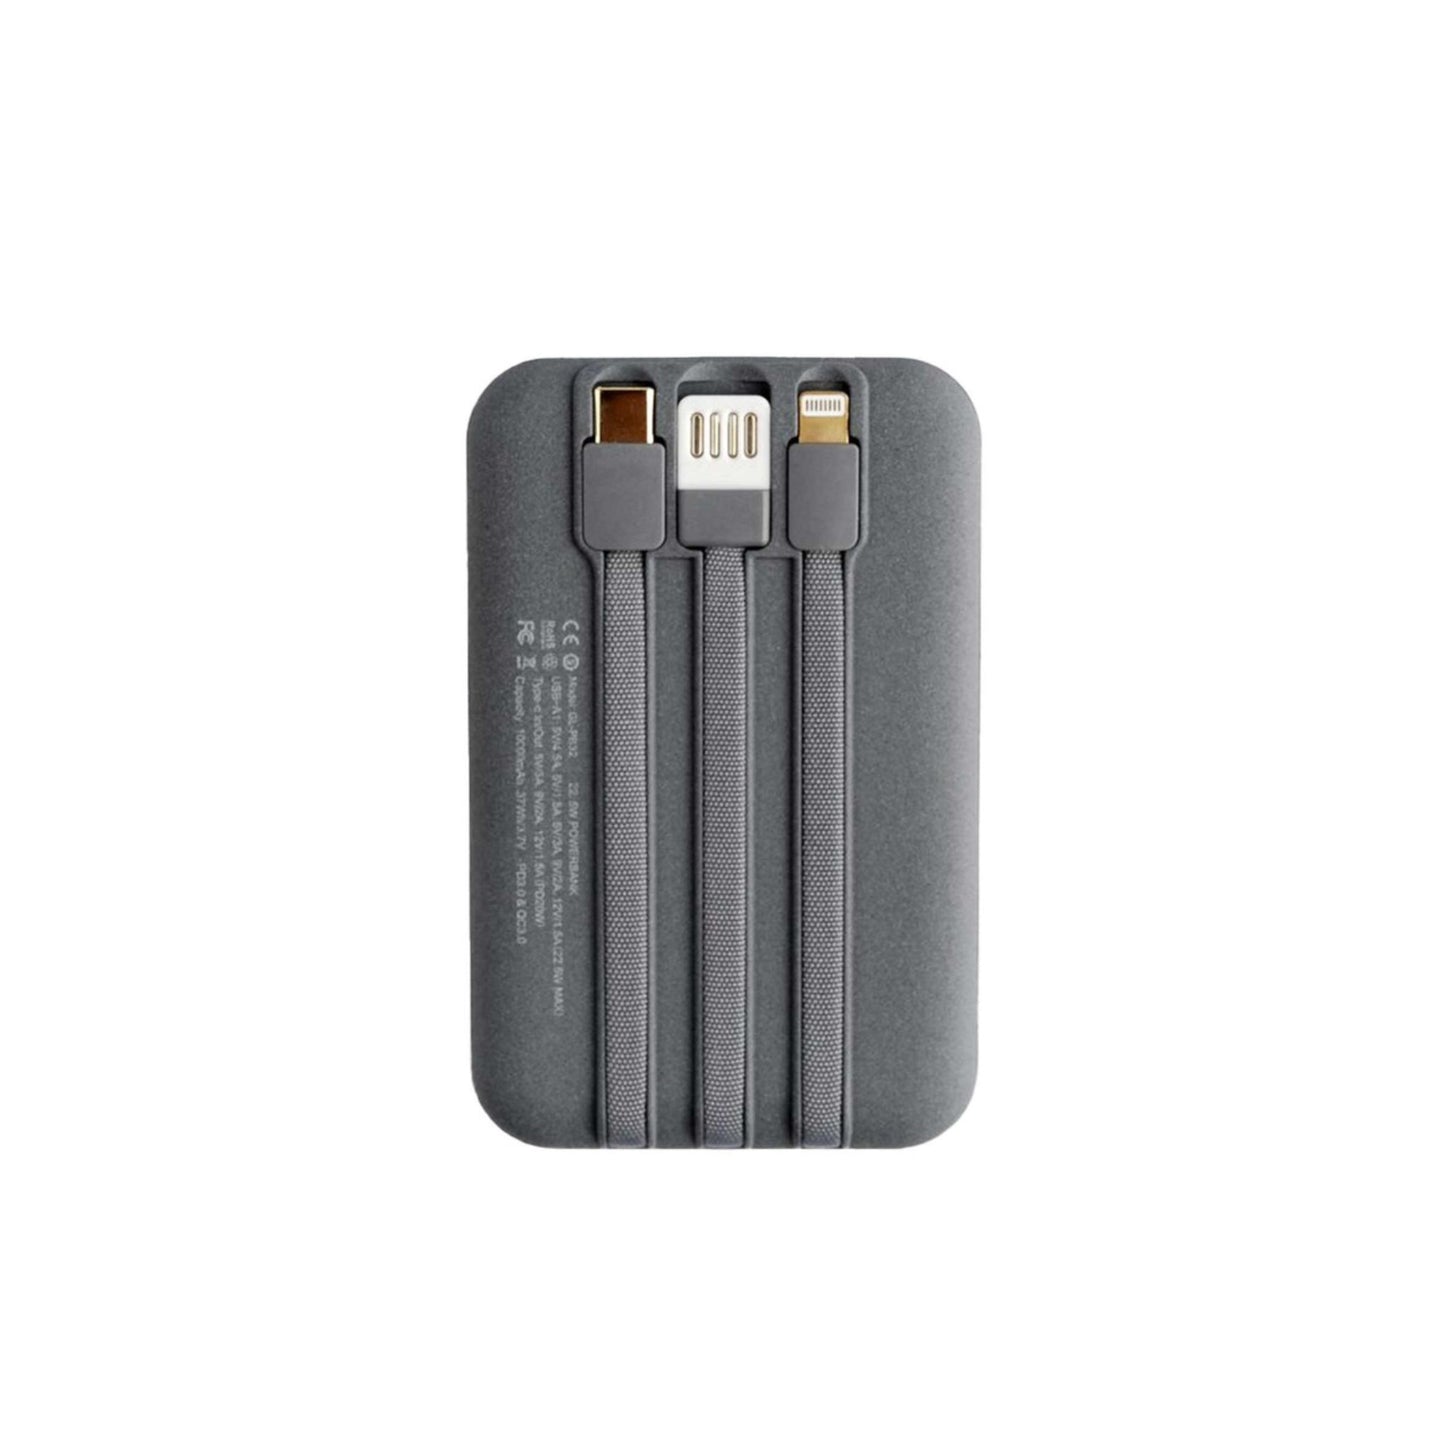 Green Lion PD 20W-3 In 1 Integrated_Power Bank_BLACK